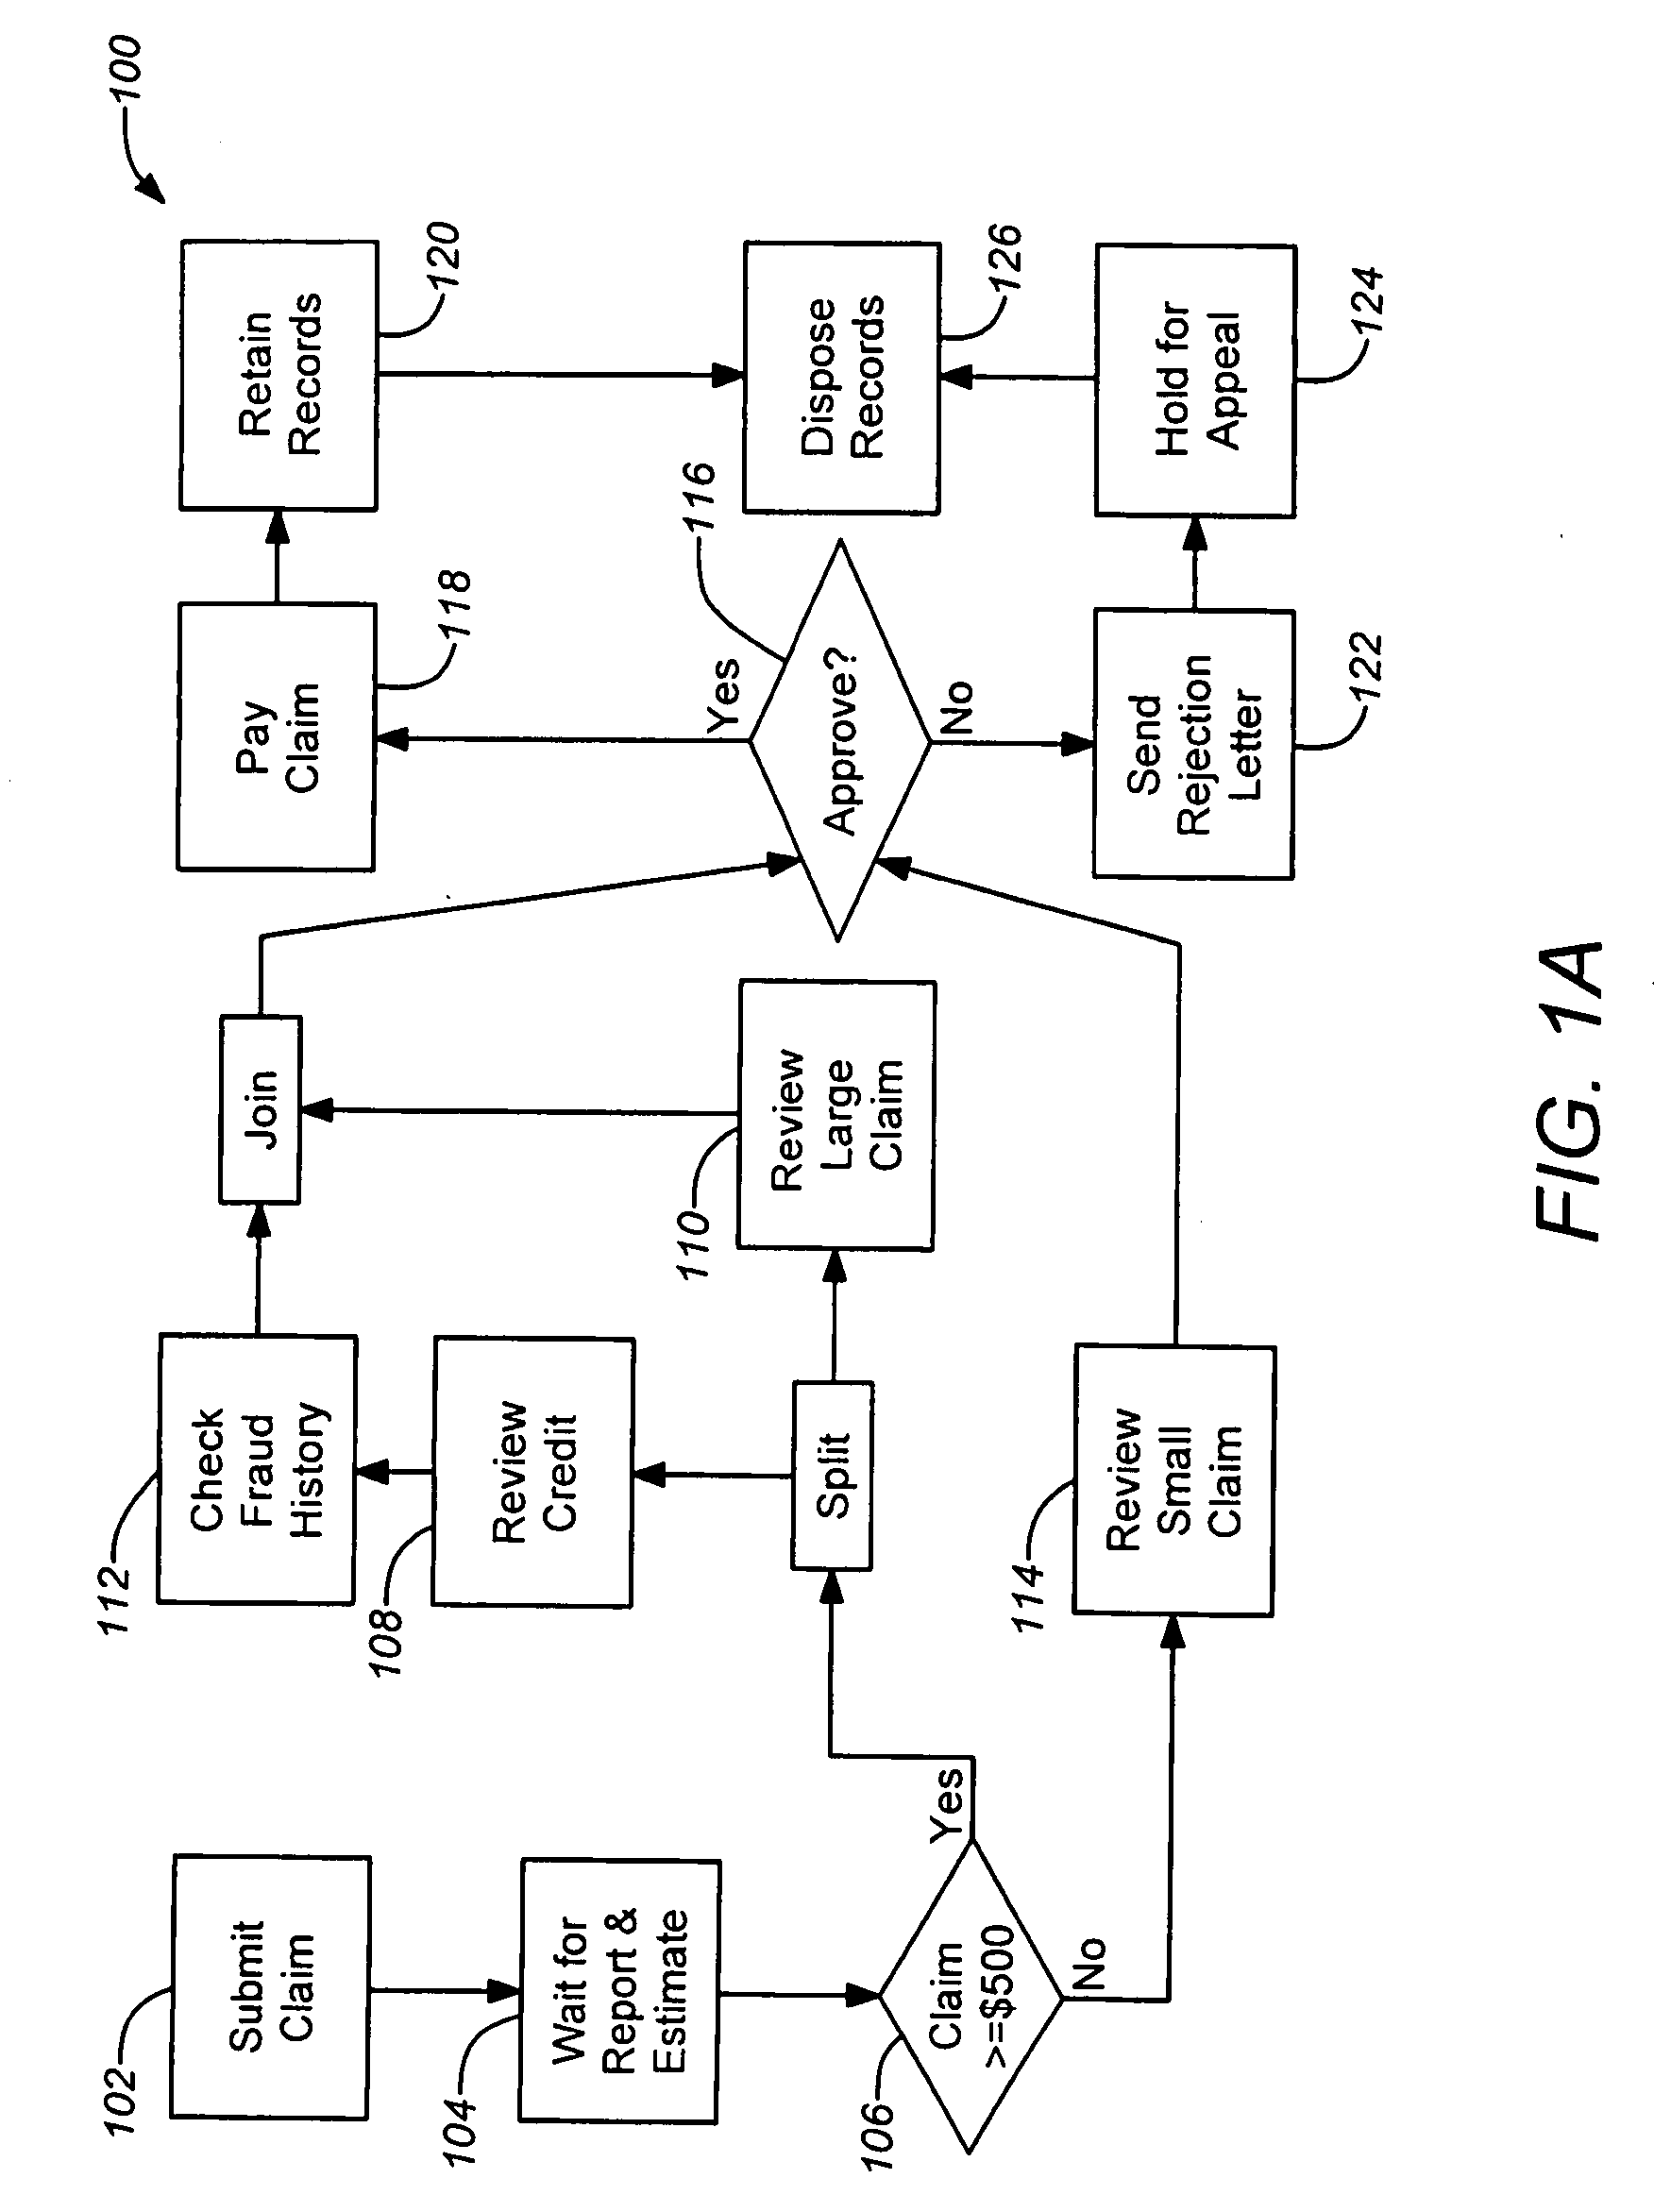 System and method for workflow-driven data storage